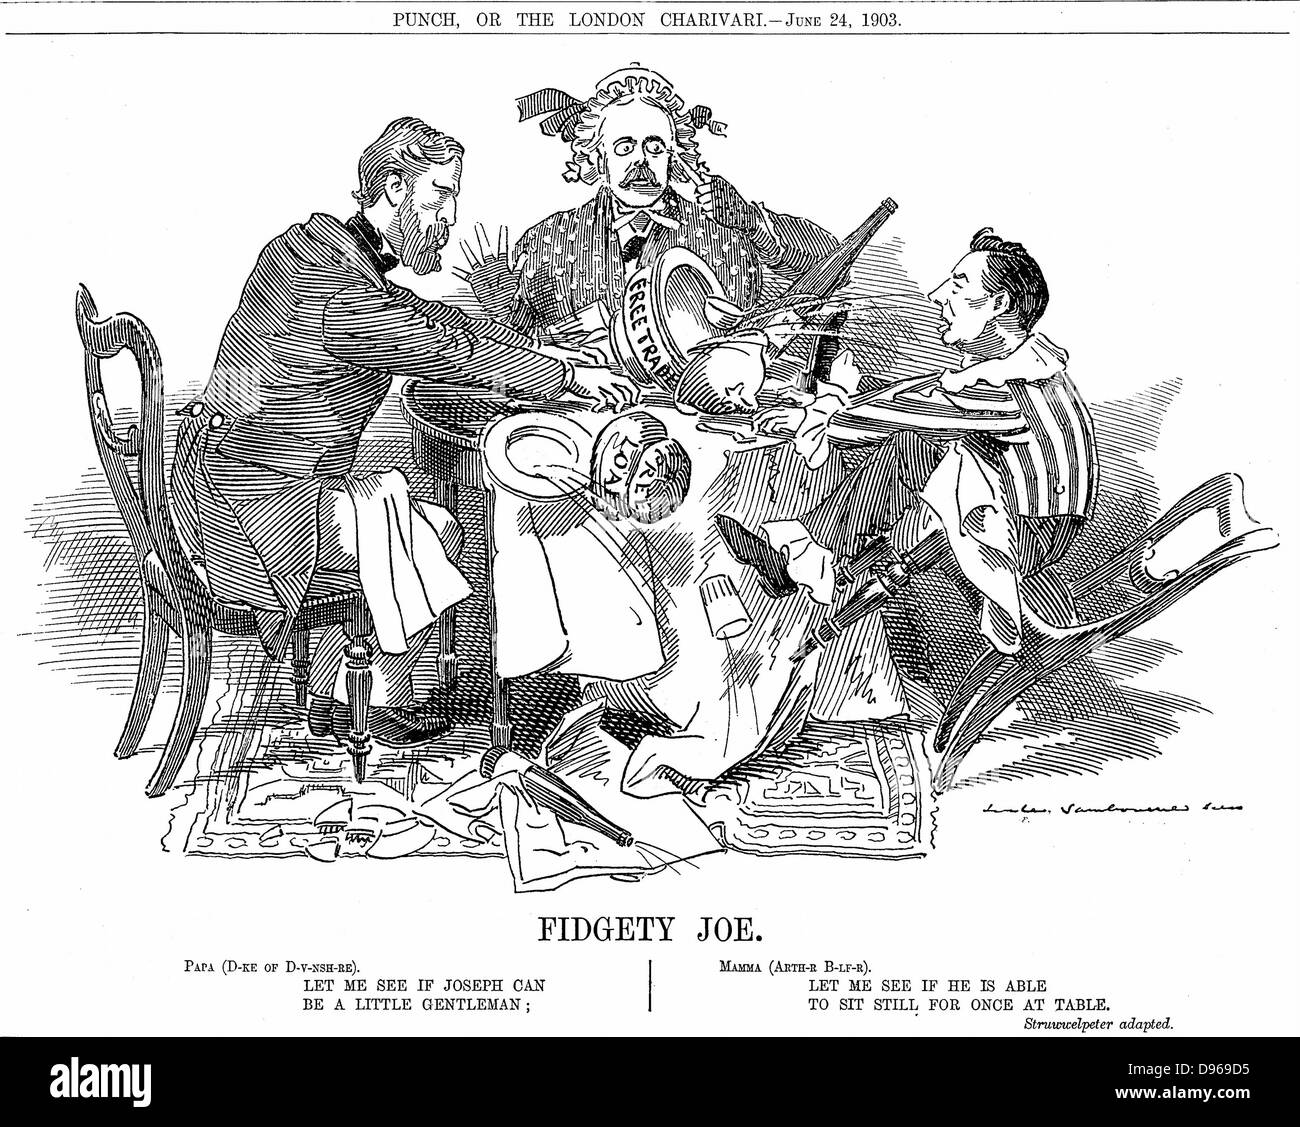 Coalition Government. Duke of Devonshire and Arthur Balfour (centre) trying to control Joseph Chamberlain, leader of junior party in coalition. In September 1903 he resigned to be free to advocate his Tariff Reforms. Cartoon by Edward Linley Sambourne fro Stock Photo